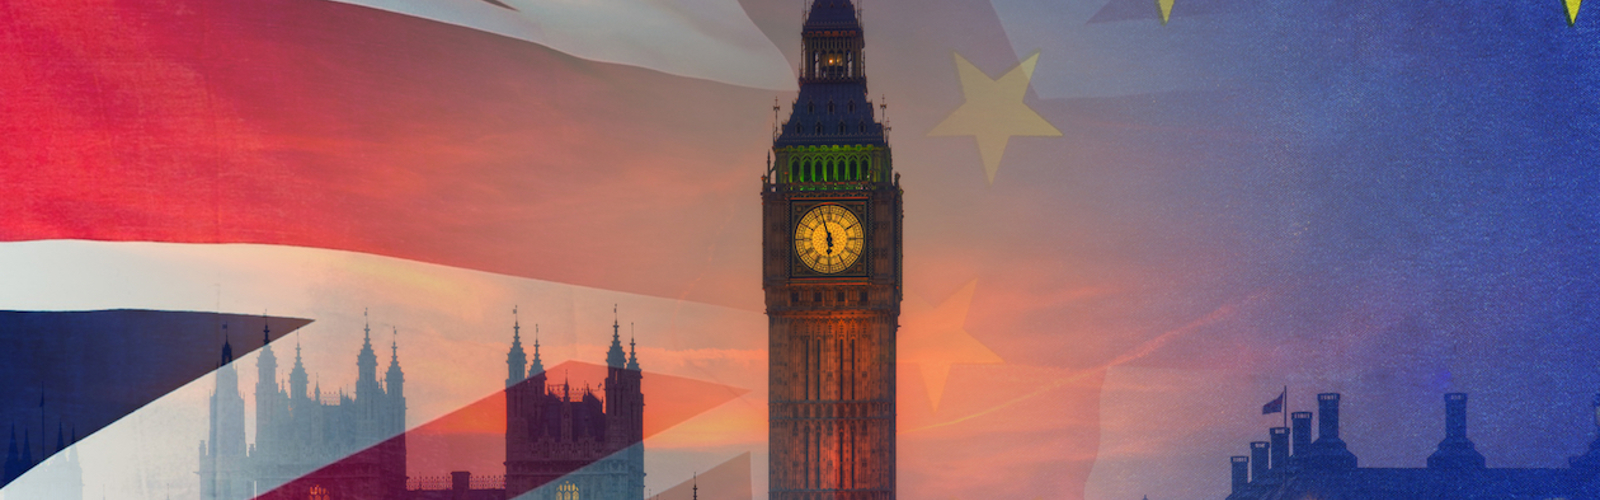 Big Ben tower, with EU and UK flags